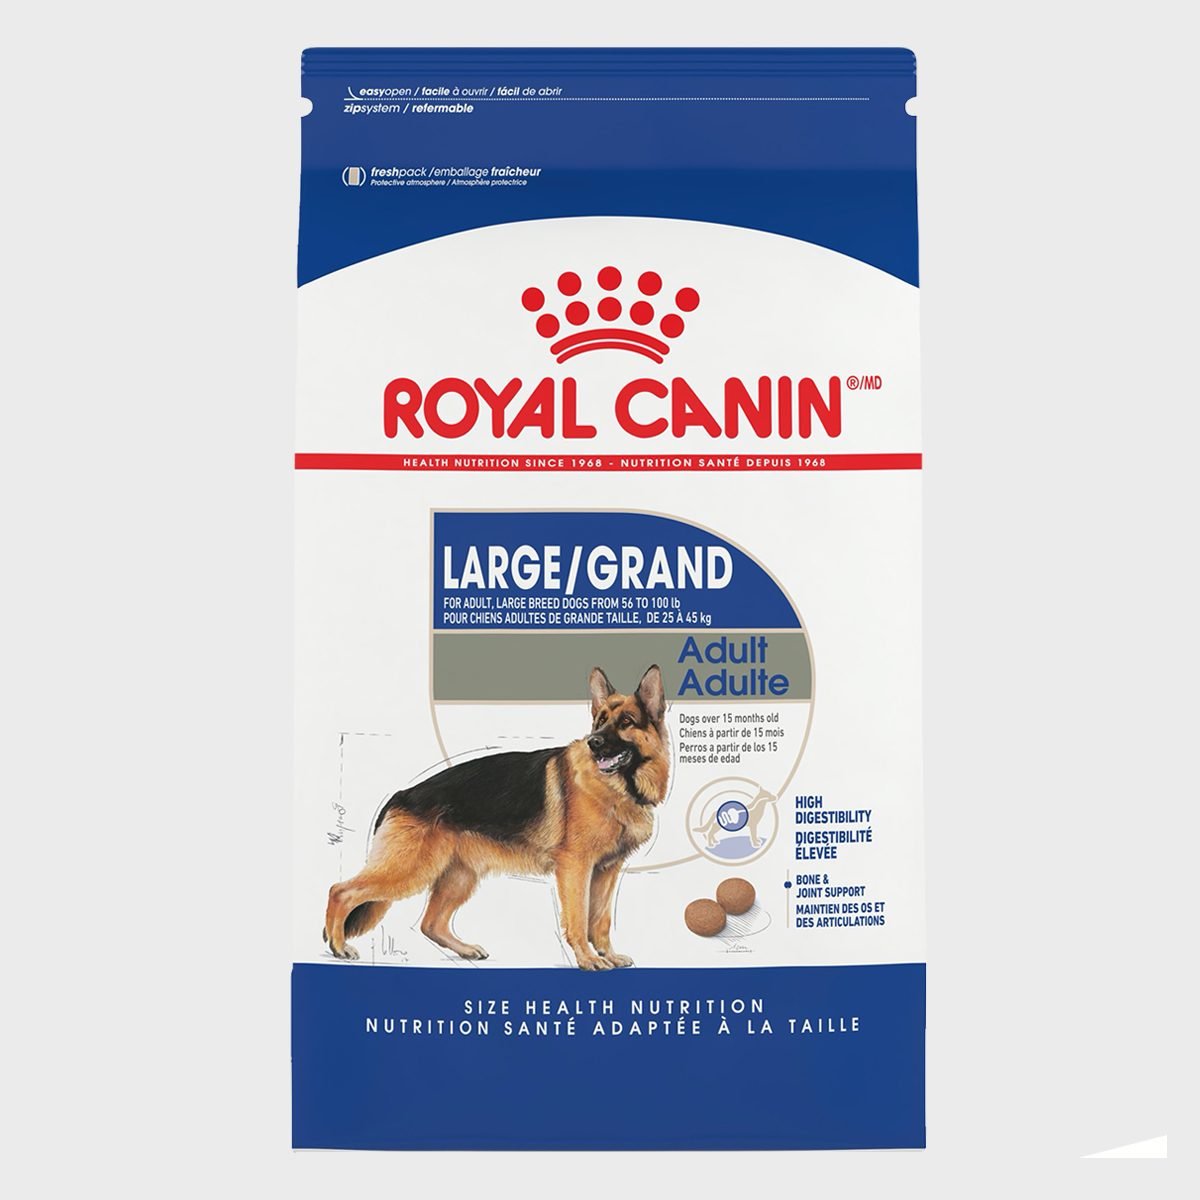 <p>Royal Canin is a quality brand, so when your large breed puppy reaches adulthood at 15 months, you can graduate to this formulation. "I like it best because it's formulated to be easily digested while supporting healthy bones and joints," says Dr. Burch. "It also has added the fatty acids of EPA and DHA, which help promote healthy joints, skin, and coat." Depending on your dog's energy level and weight, you can customize the portion size using Royal Canin's feeding guide, which recommends feeding 75-pound dogs that are moderately active four cups per day. Speaking of maintaining your pup's coat, you'll want to bookmark these tips on <a href="https://www.rd.com/article/how-to-groom-your-dog/">how to groom your dog</a>.</p> <p><strong>Highlights:</strong></p> <ul> <li>Quality protein and dietary fiber for good digestion</li> <li>Supports healthy bones and joints</li> <li>Satisfies a large dog's appetite</li> </ul> <p class="listicle-page__cta-button-shop"><a class="shop-btn" href="https://www.petco.com/shop/en/petcostore/product/royal-canin-maxi-large-breed-adult-dog-food">Shop Now</a></p>